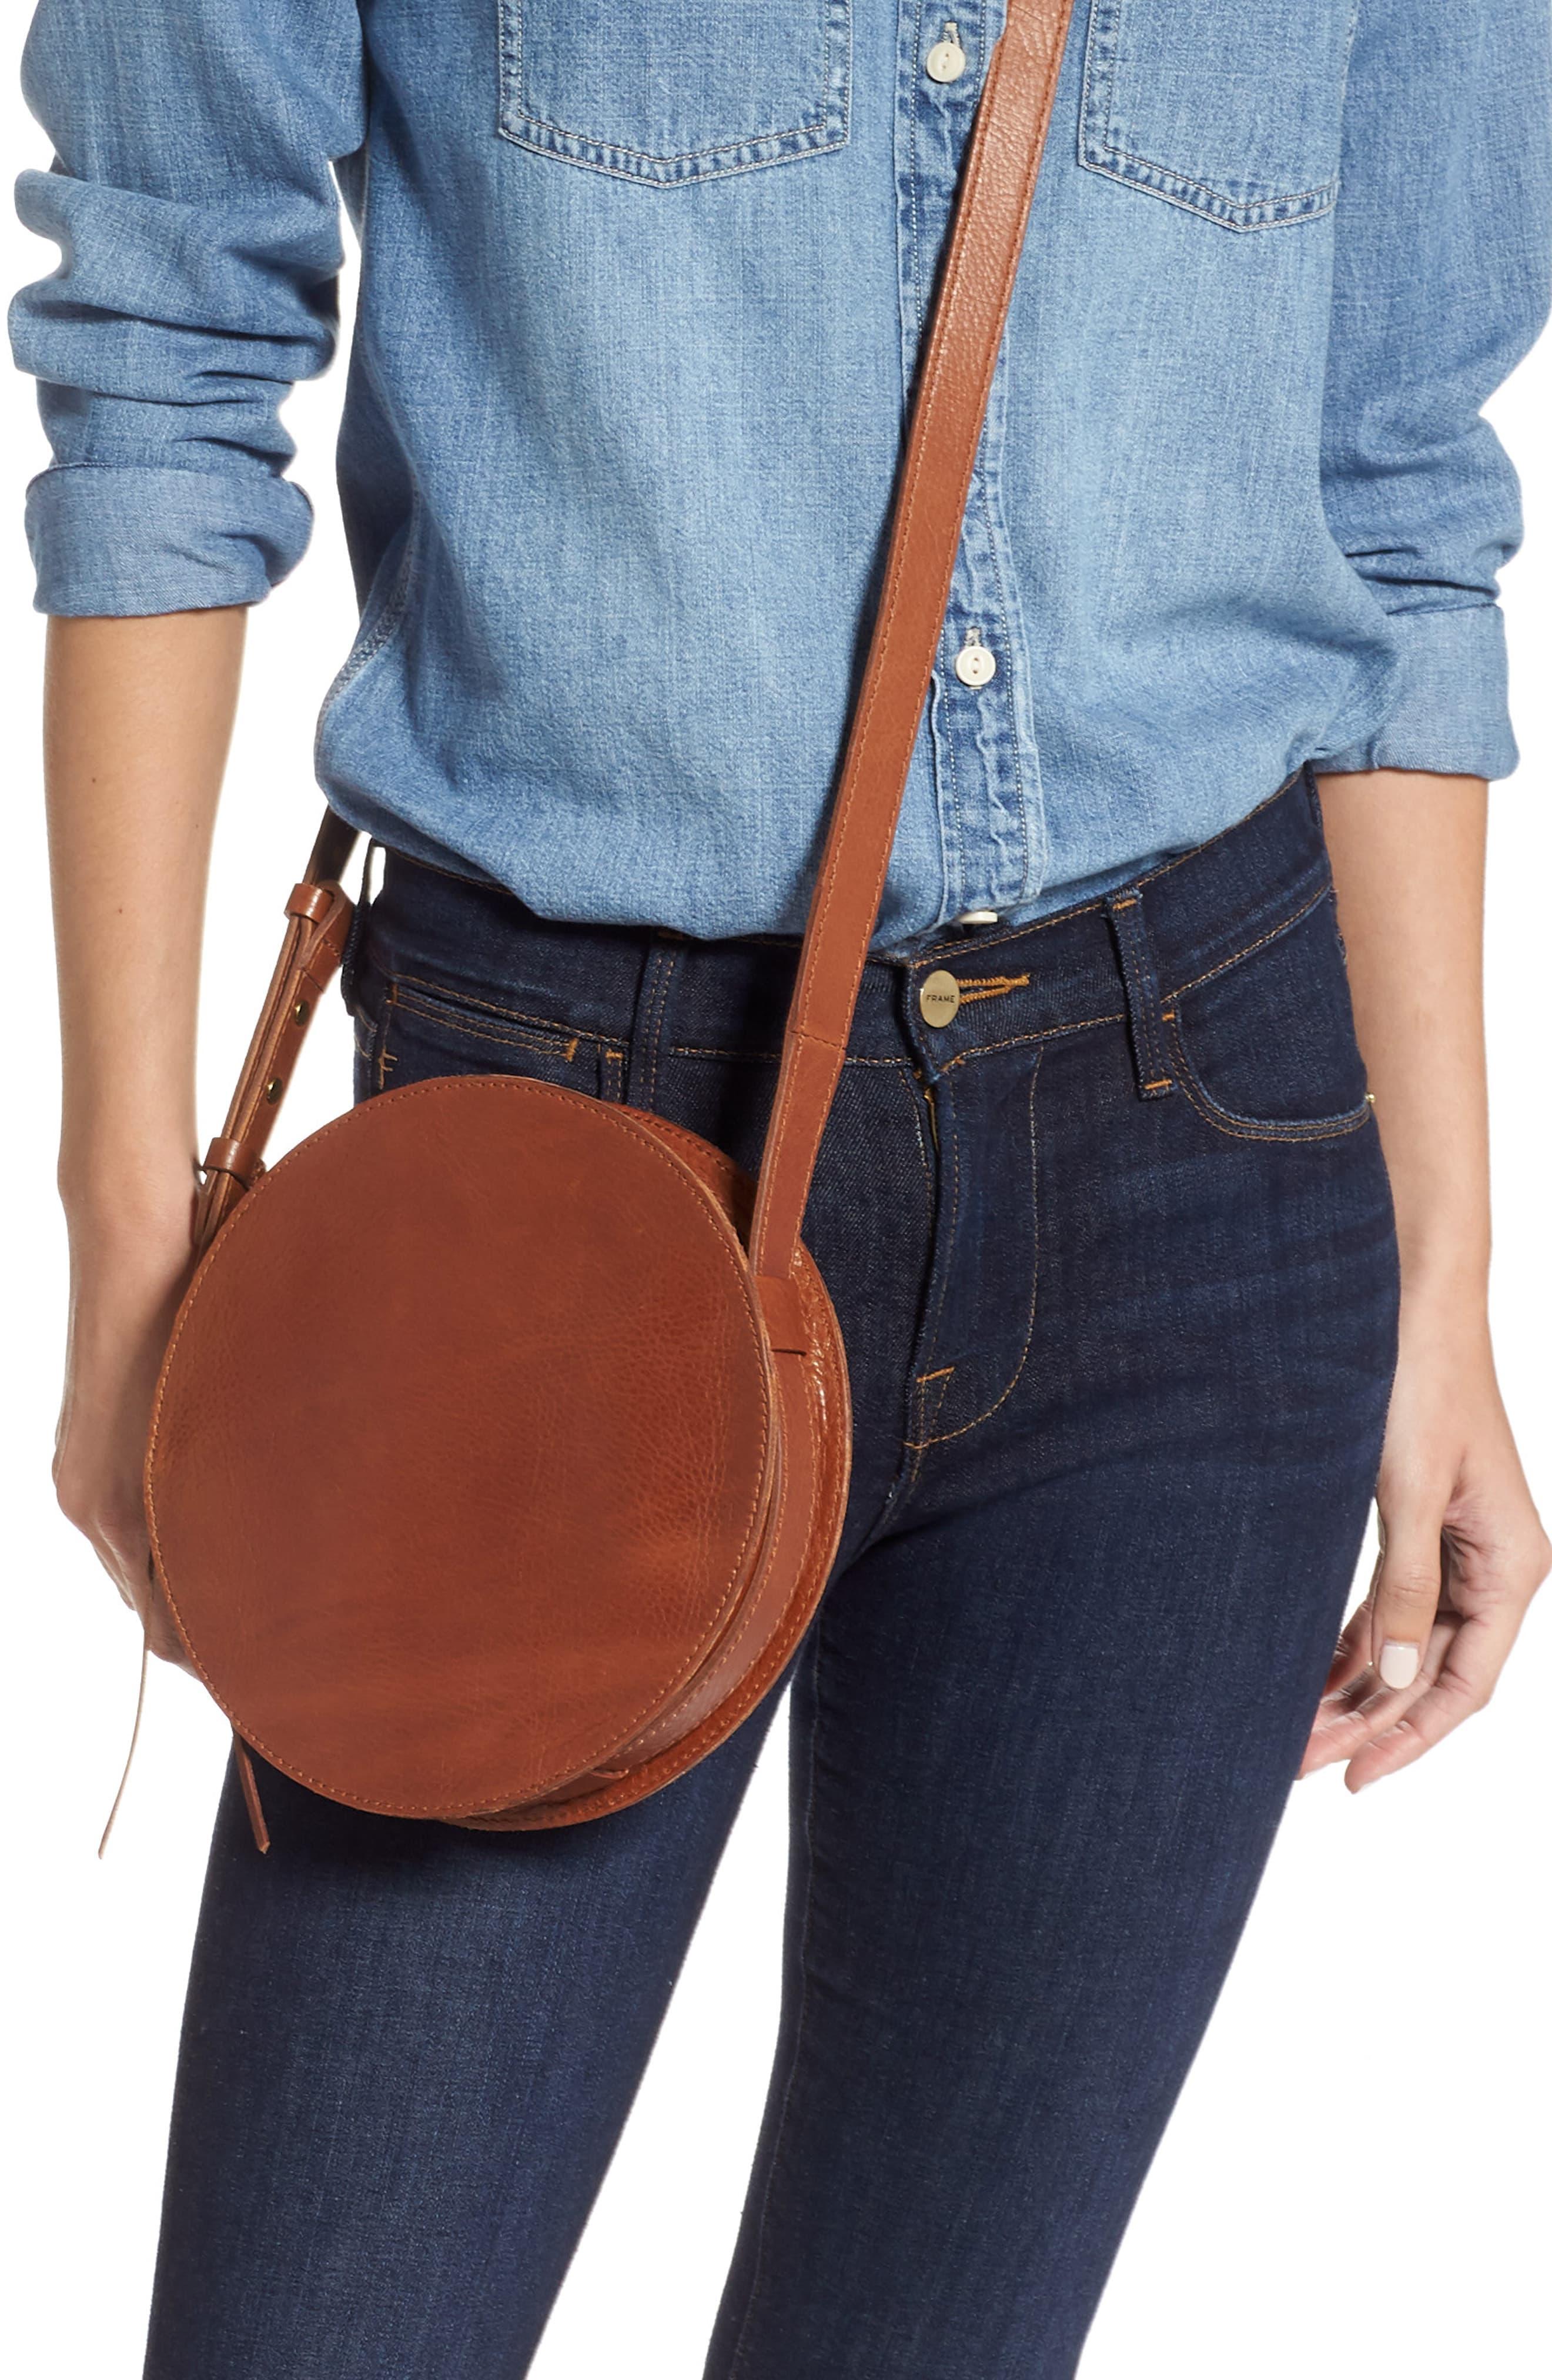 Madewell The Simple Circle Leather Crossbody Bag in Brown - Lyst